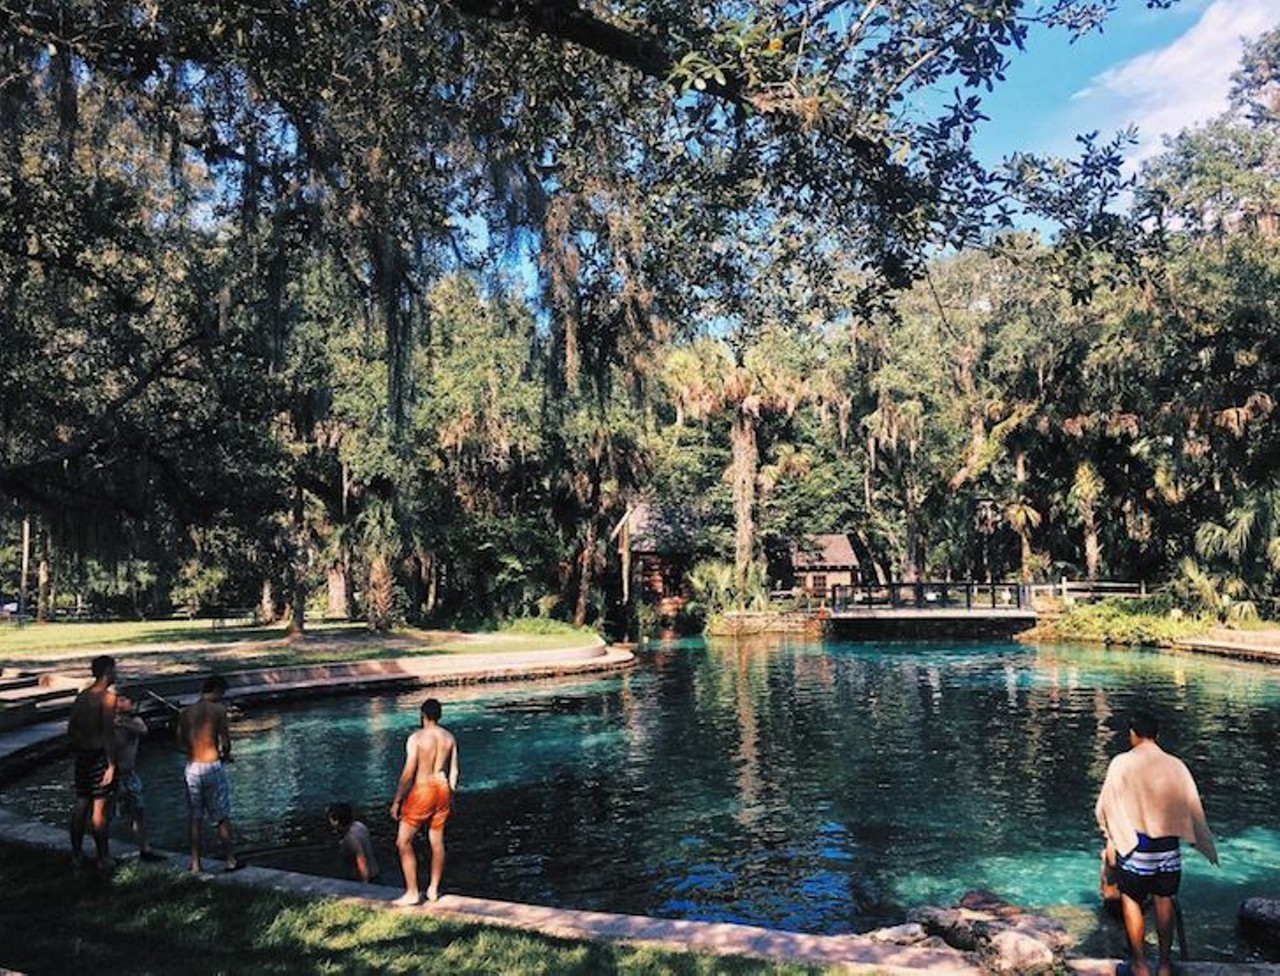 Juniper Springs
26701 E. Highway 40, Silver Springs
1 hour, 15 minutes away
One of the oldest recreation areas on the east coast, Juniper Springs lies beneath a dense canopy of palms and oaks, offering Old Florida charm in an oasis among the swamp scrub land. 
Photo via thematowsshow/Instagram